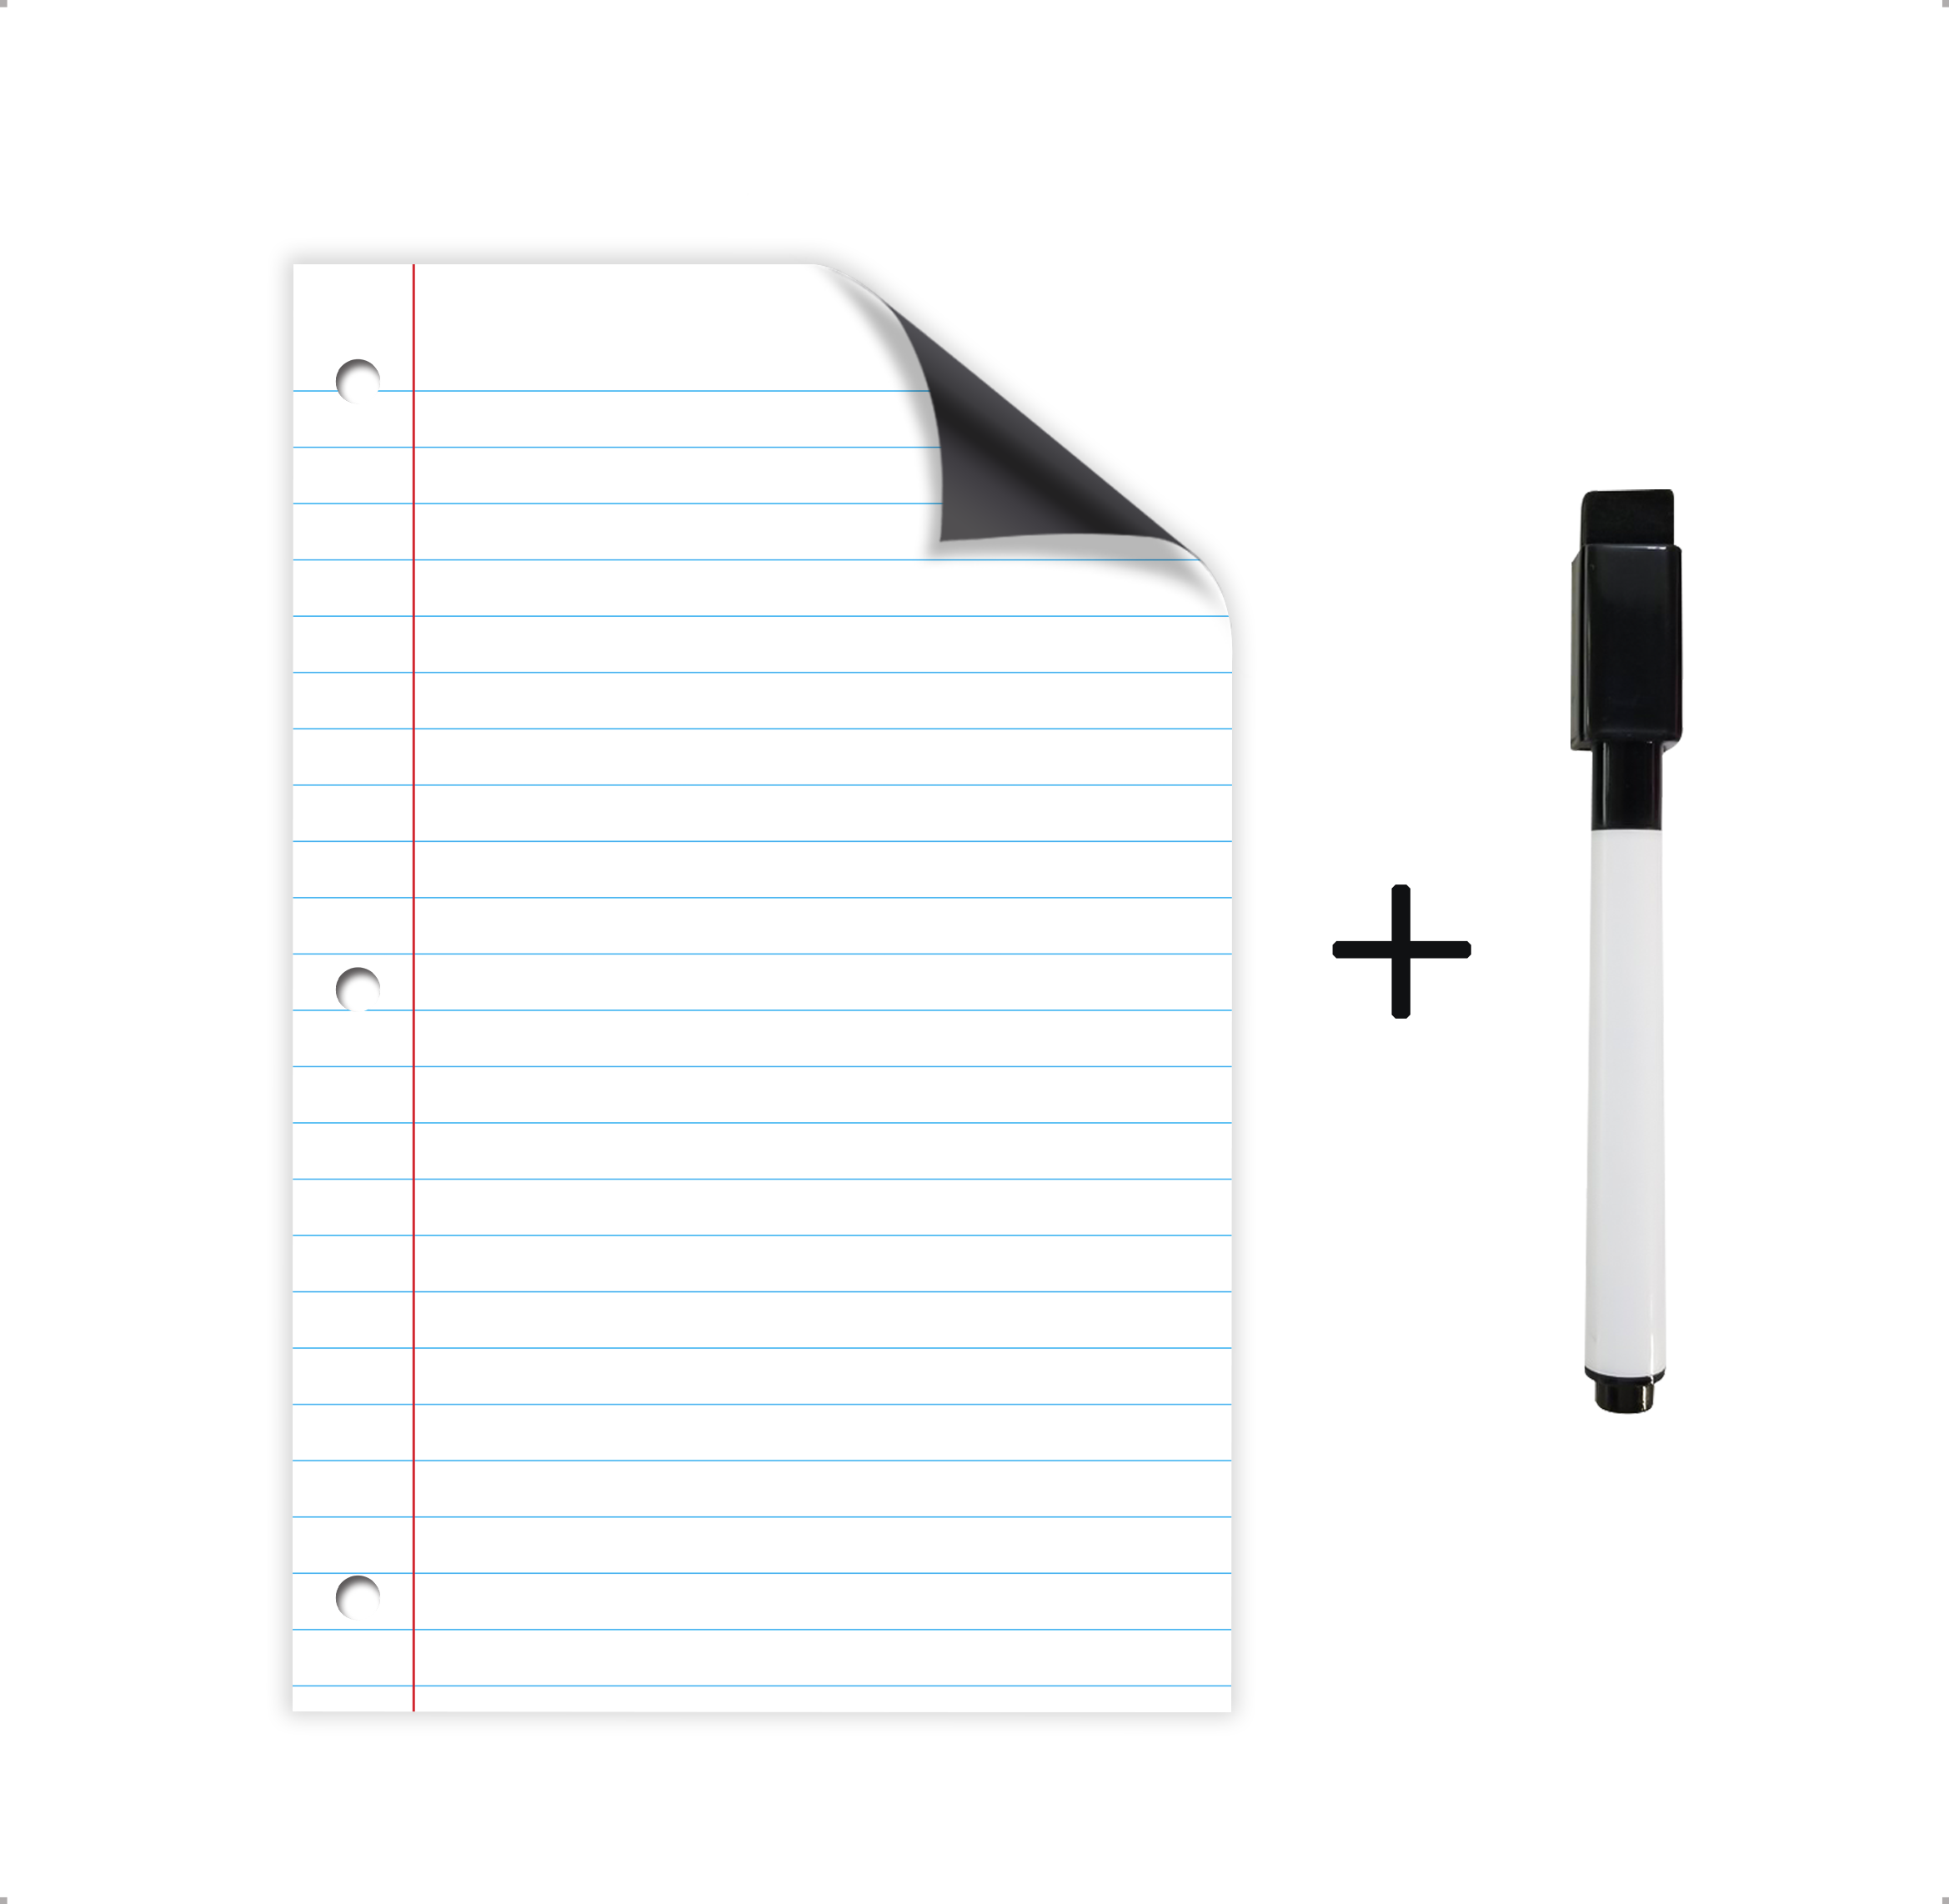 Dry Erase sheet Notebook design. 11x17 inches.